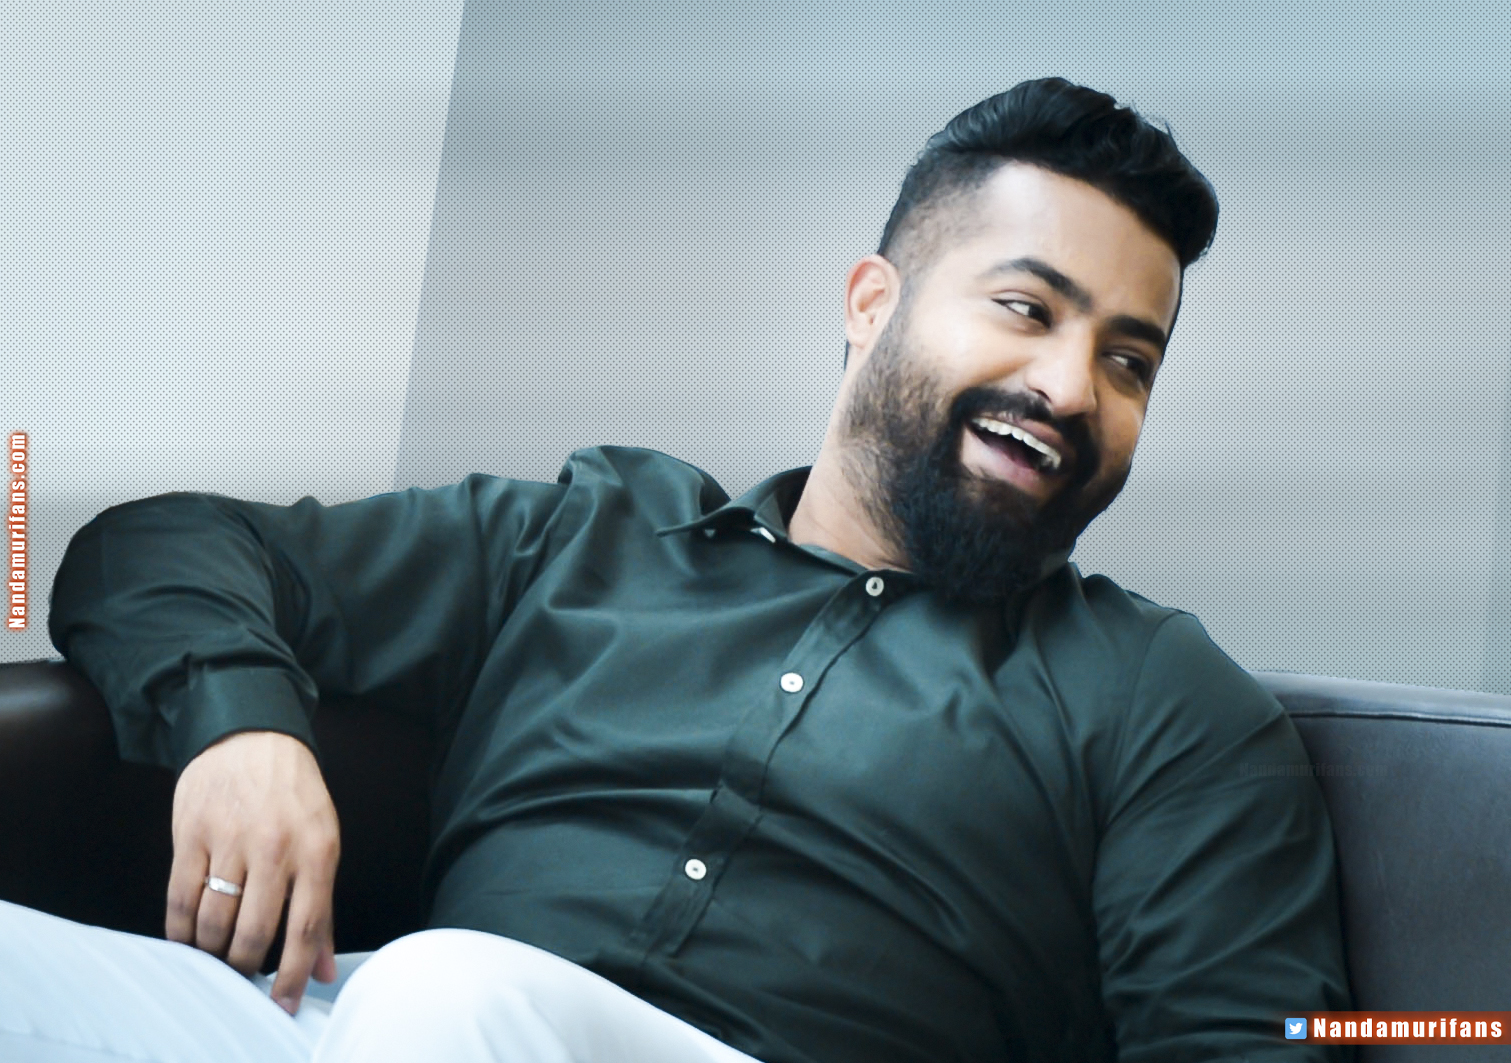 NTR's dynamic look!! | Hd photos, New images hd, New photos hd